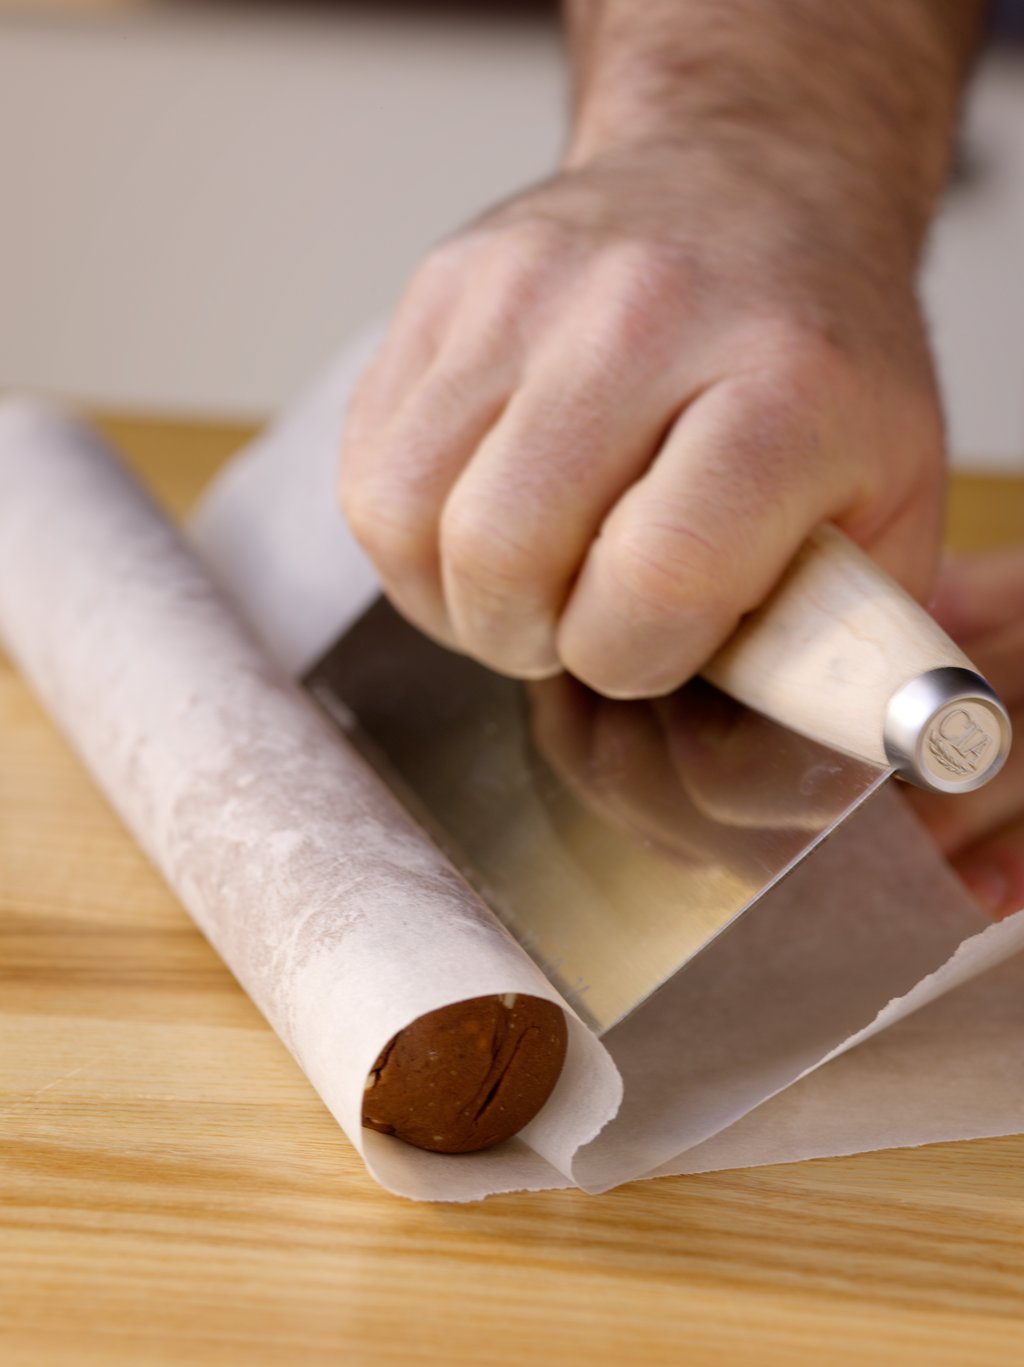 Place a log of icebox cookie dough on a piece of parchment paper and use a bench knife to wrap the log tightly in the paper. The log can now be chilled or frozen until you are ready to bake.